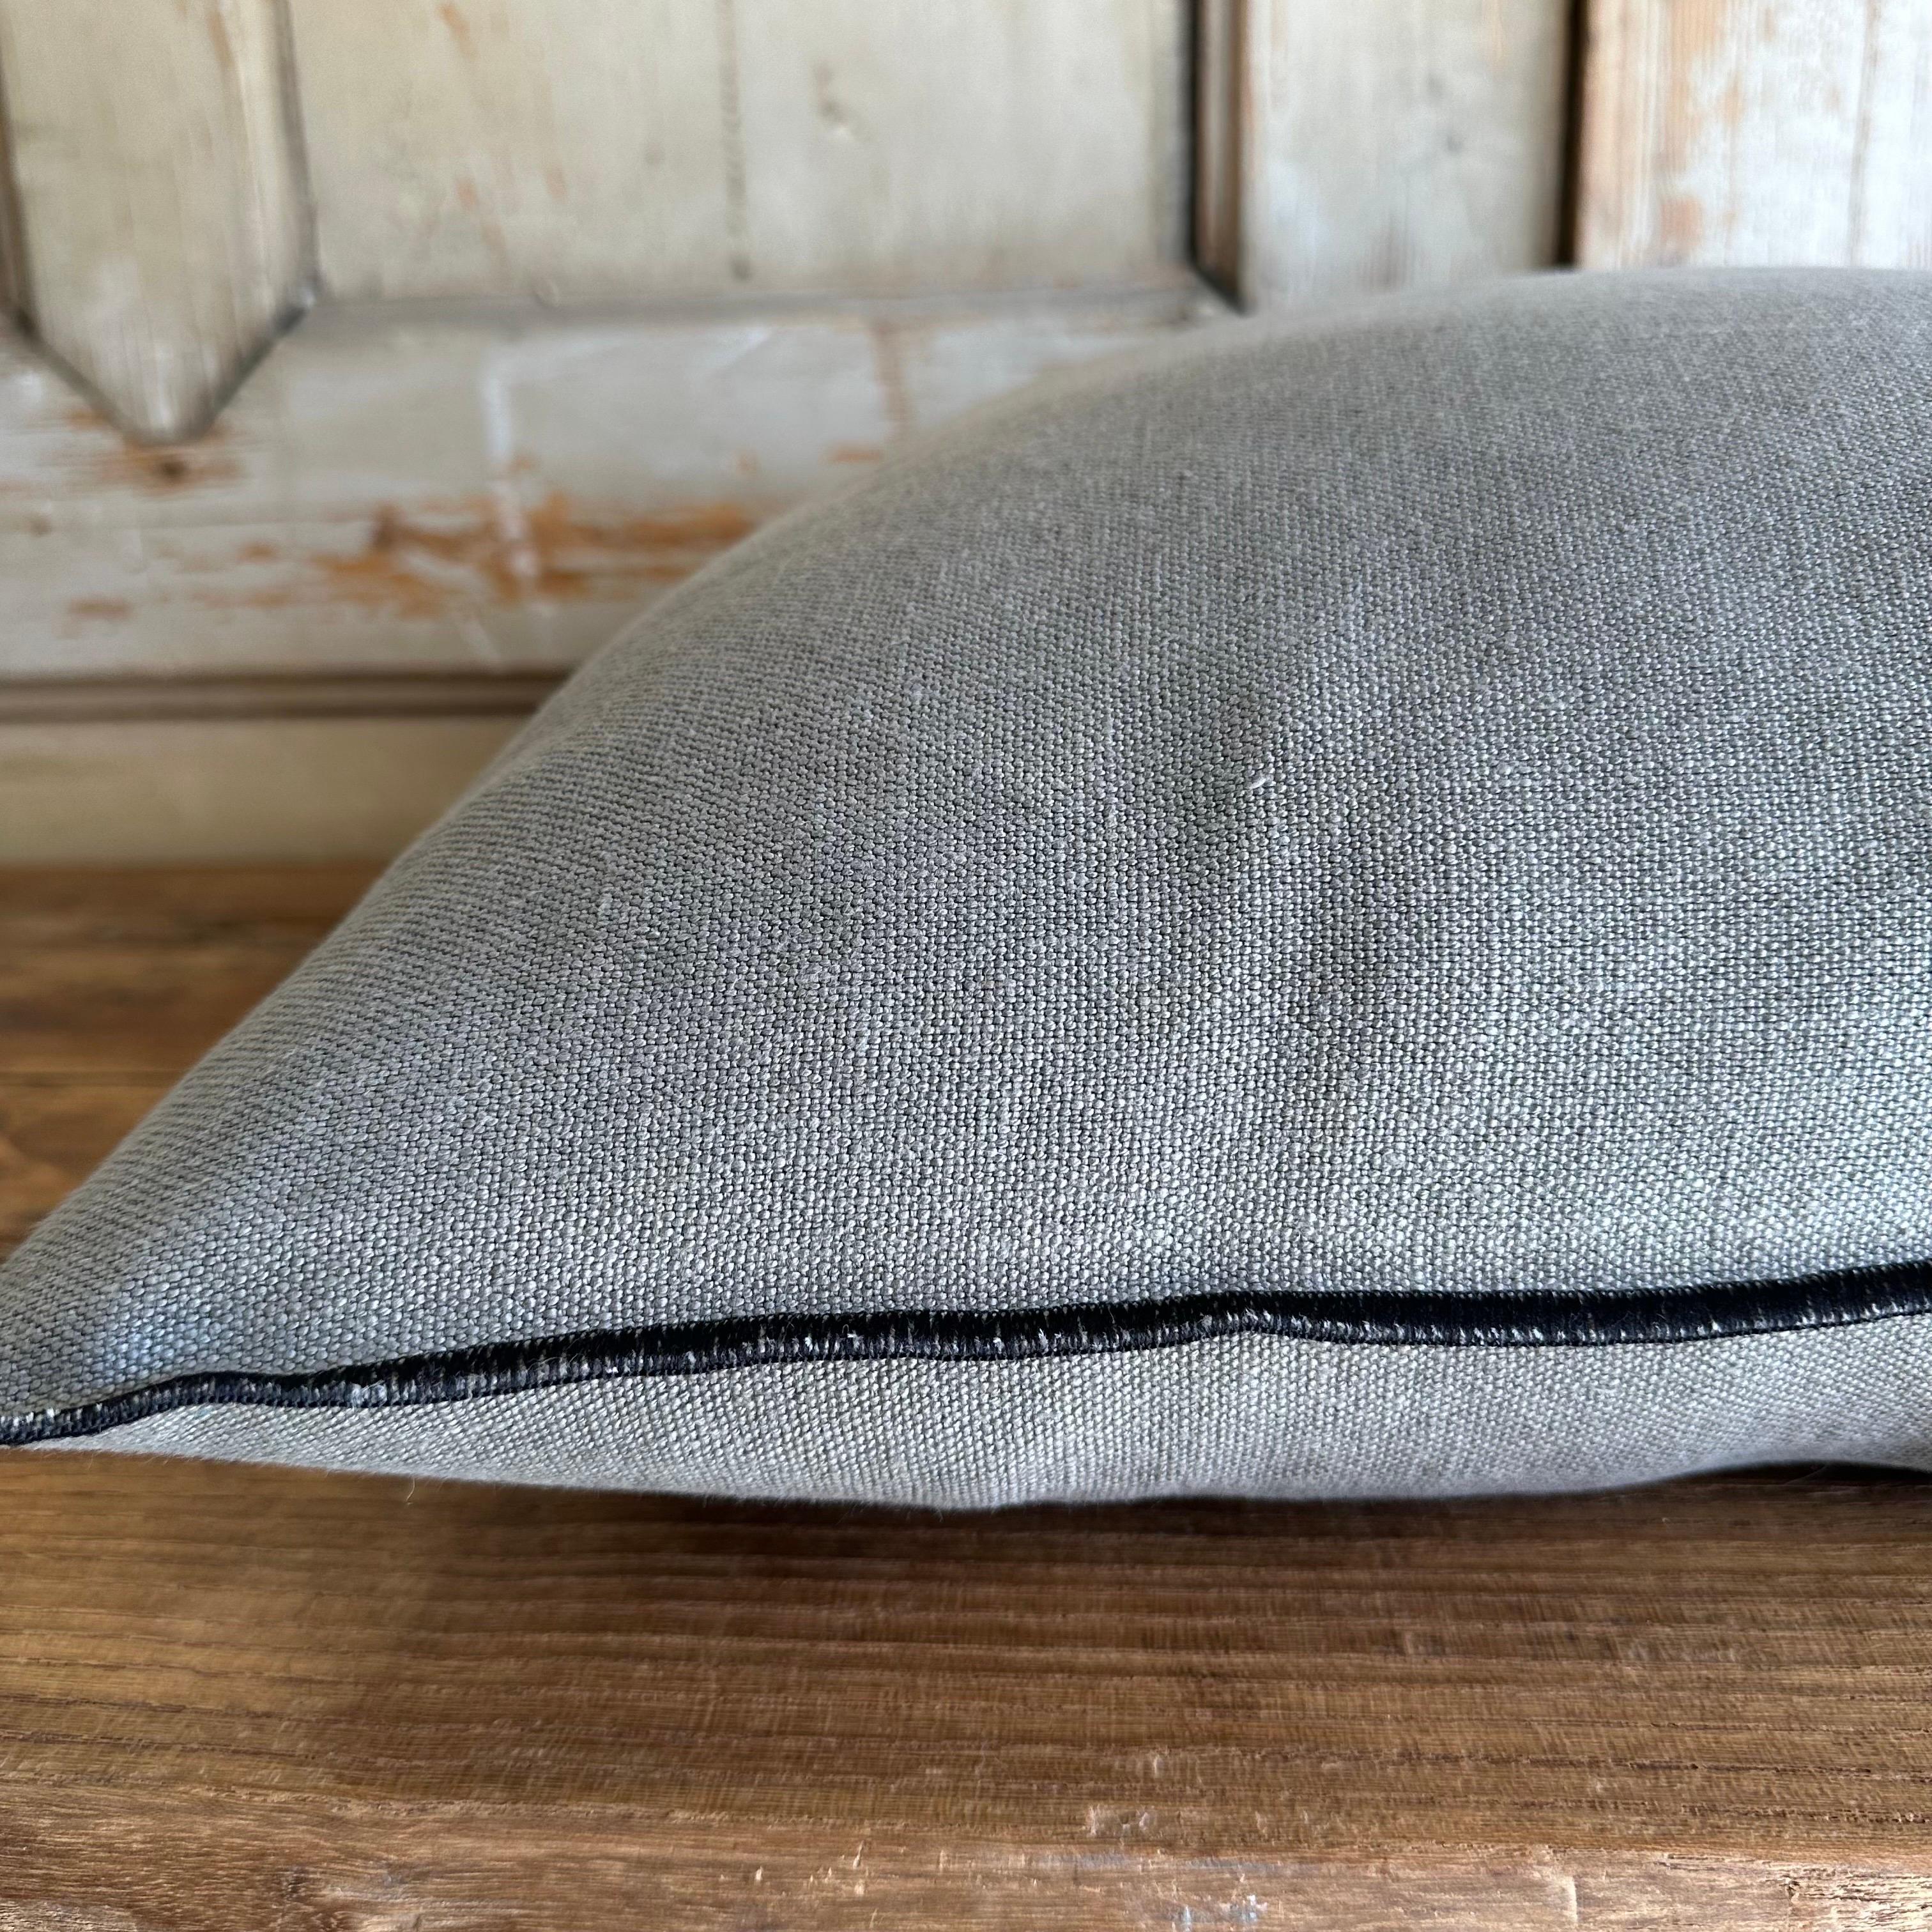 Stone Washed French Linen Accent Pillow in Elephant For Sale 2